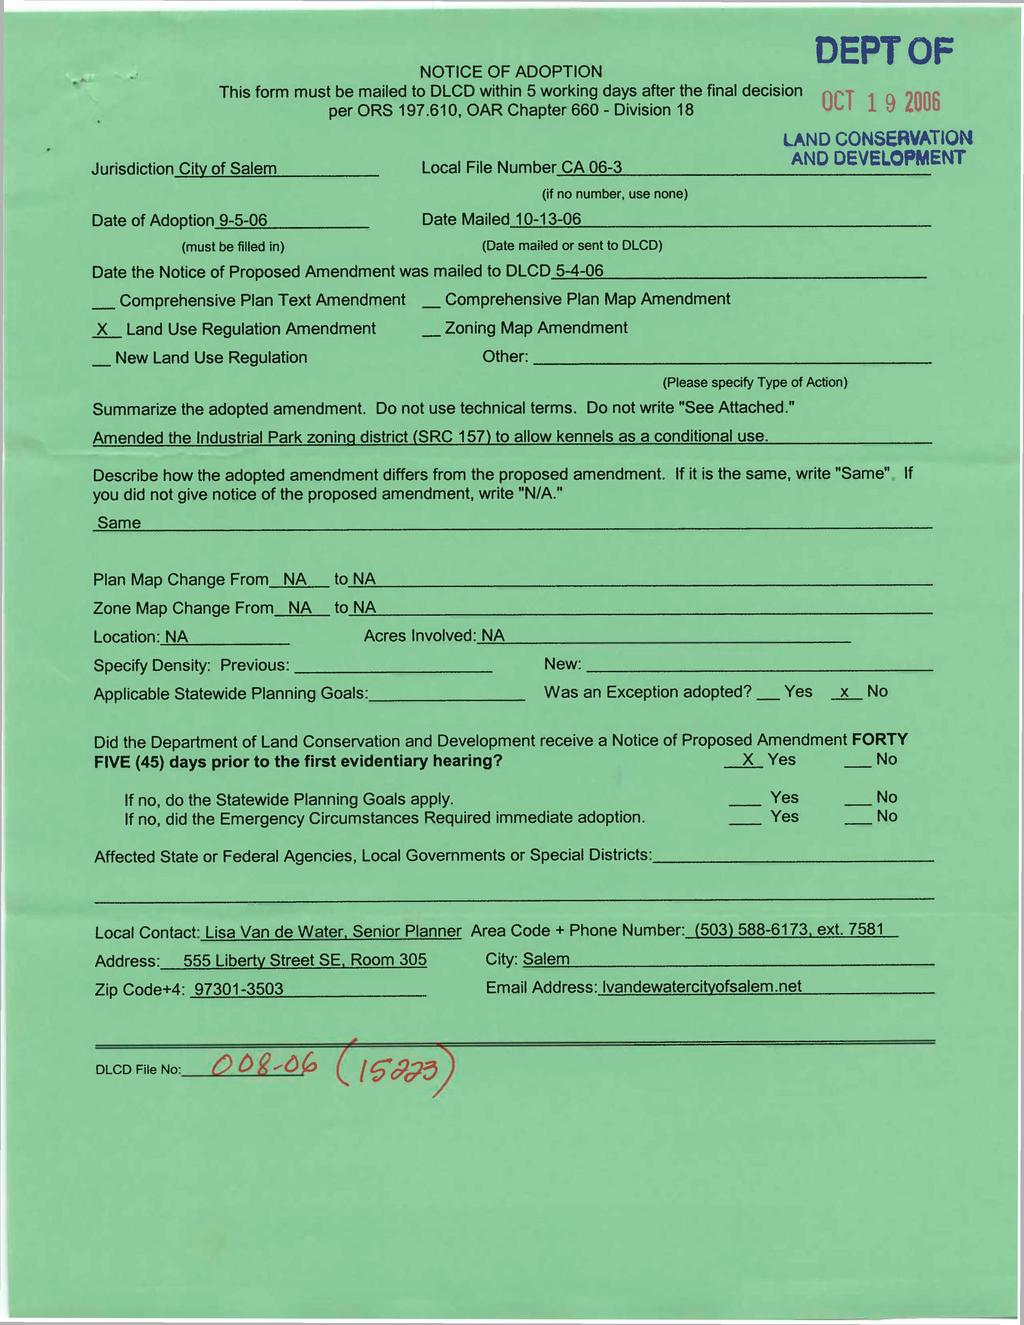 DEPTOF NOTICE OF ADOPTION This form must be mailed to DLCD within 5 working days after the final decision per ORS 197.